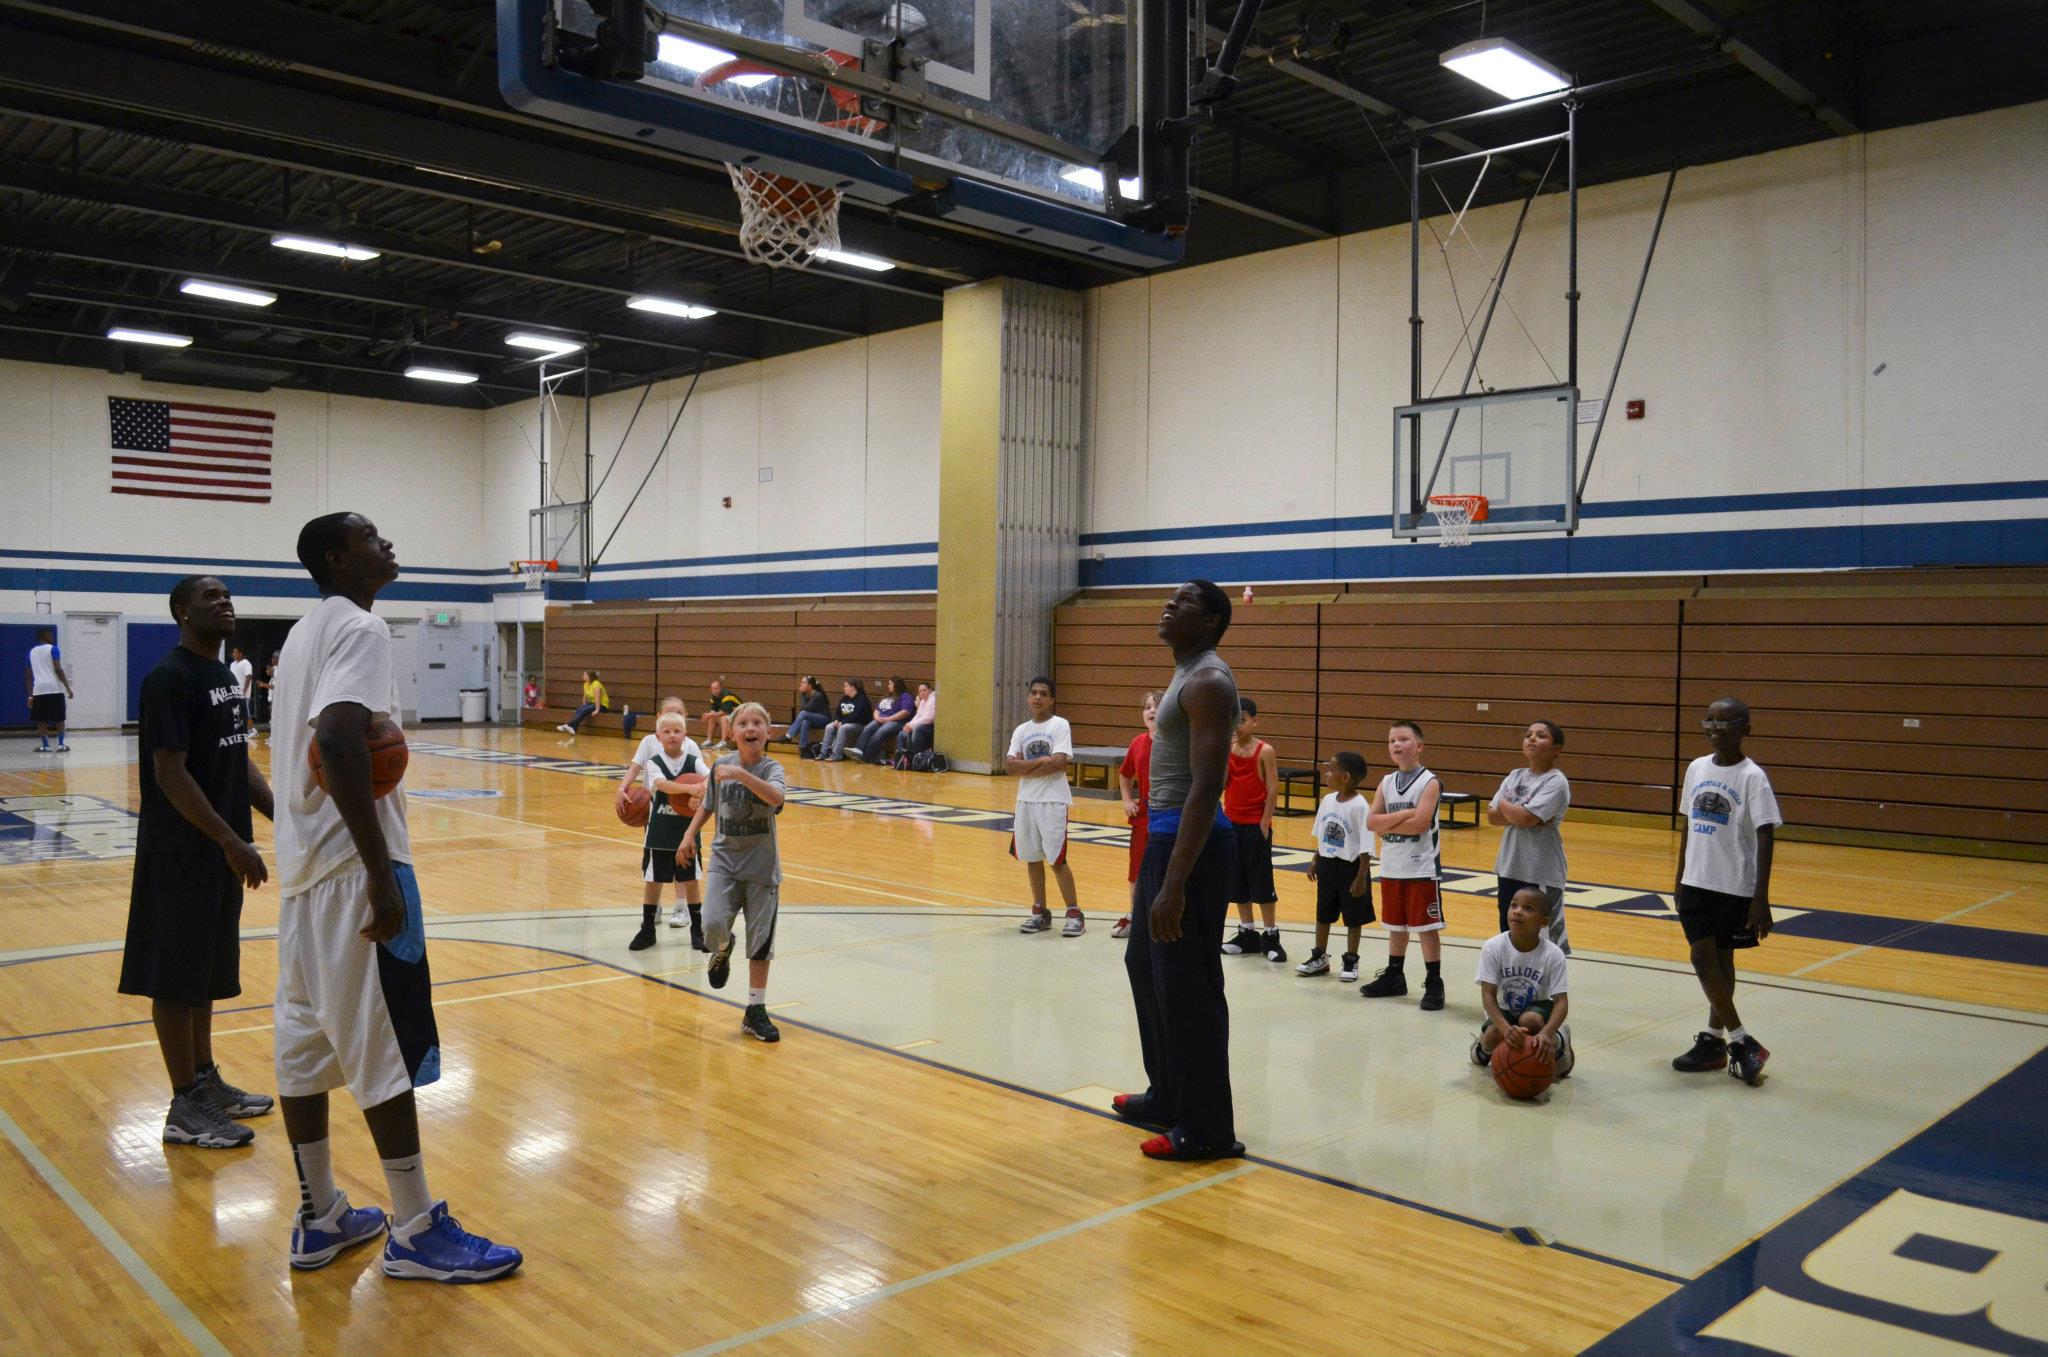 KCC basketball to hold Summer Basketball Camp for youths in June KCC